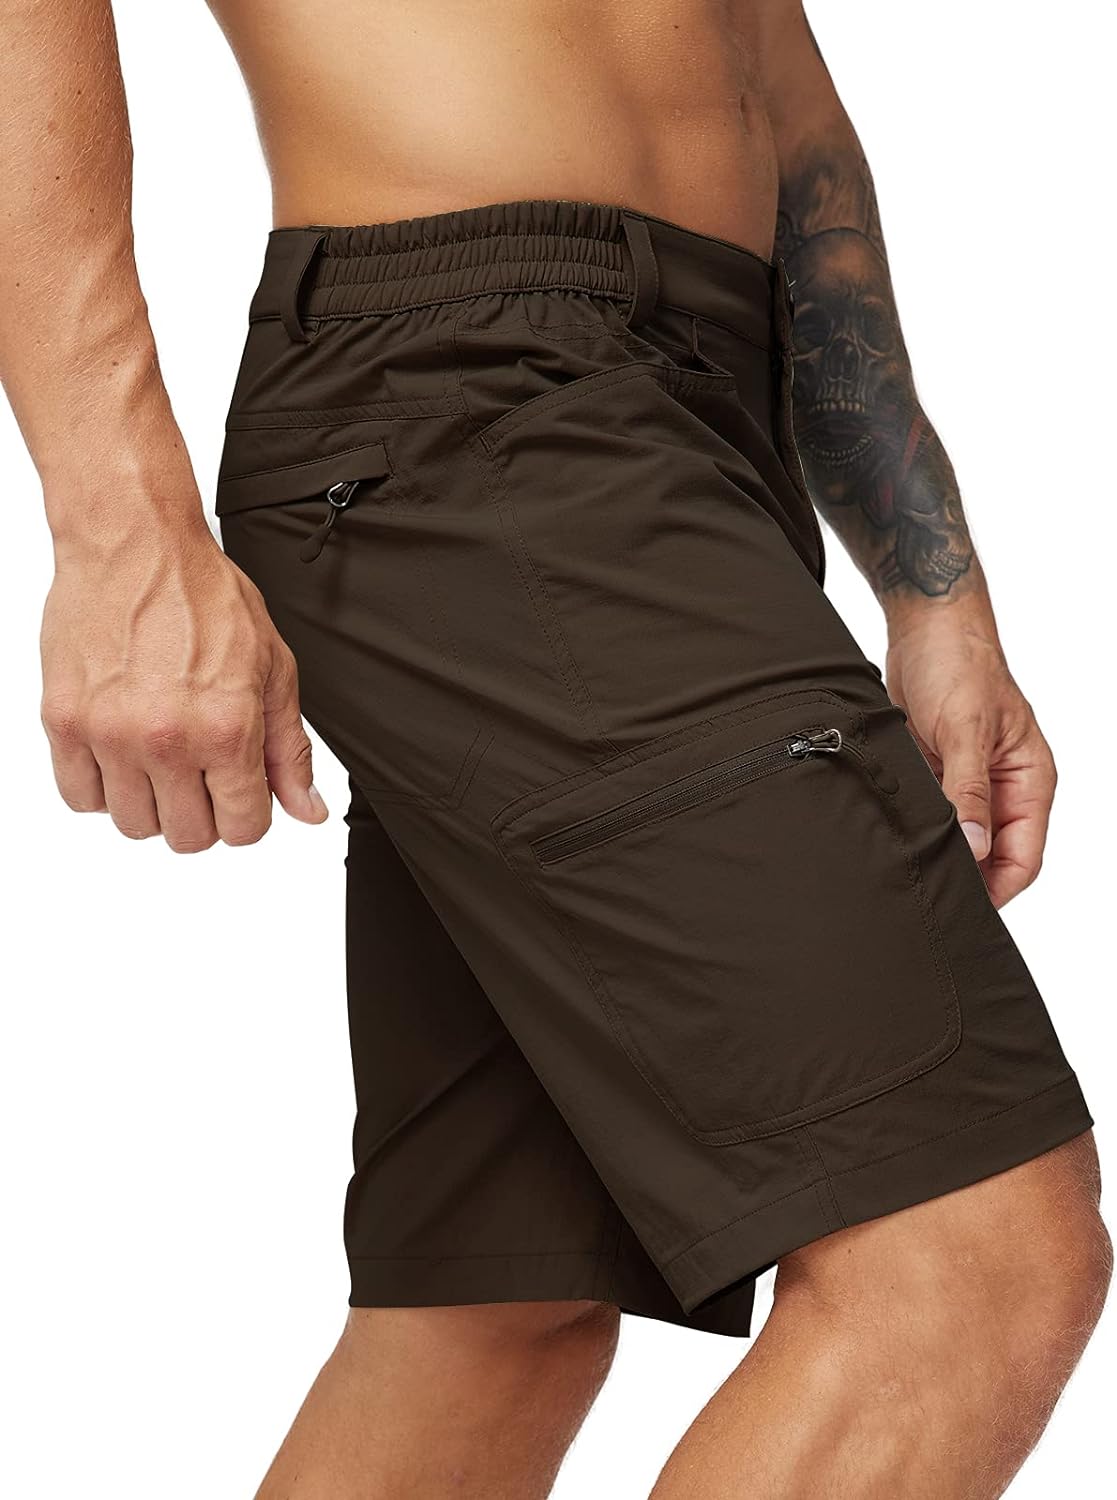 MIER Men's Quick Dry Hiking Shorts Lightweight Cargo Shorts with 6 Pockets Stretchy Water Resistant